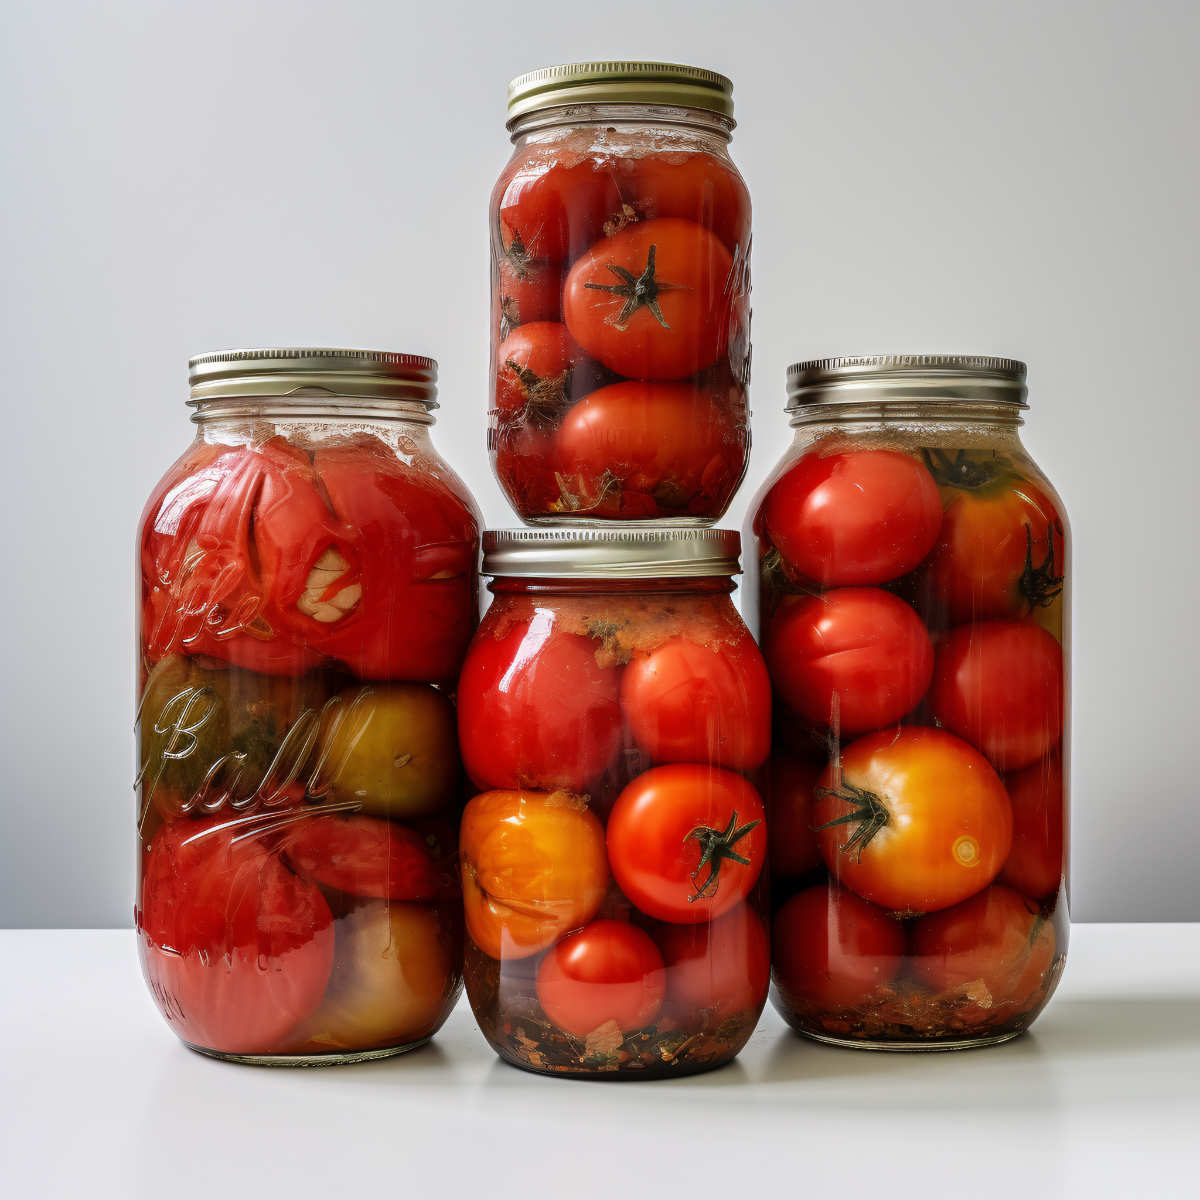 Discoloration of Tomatoes in glass jars.